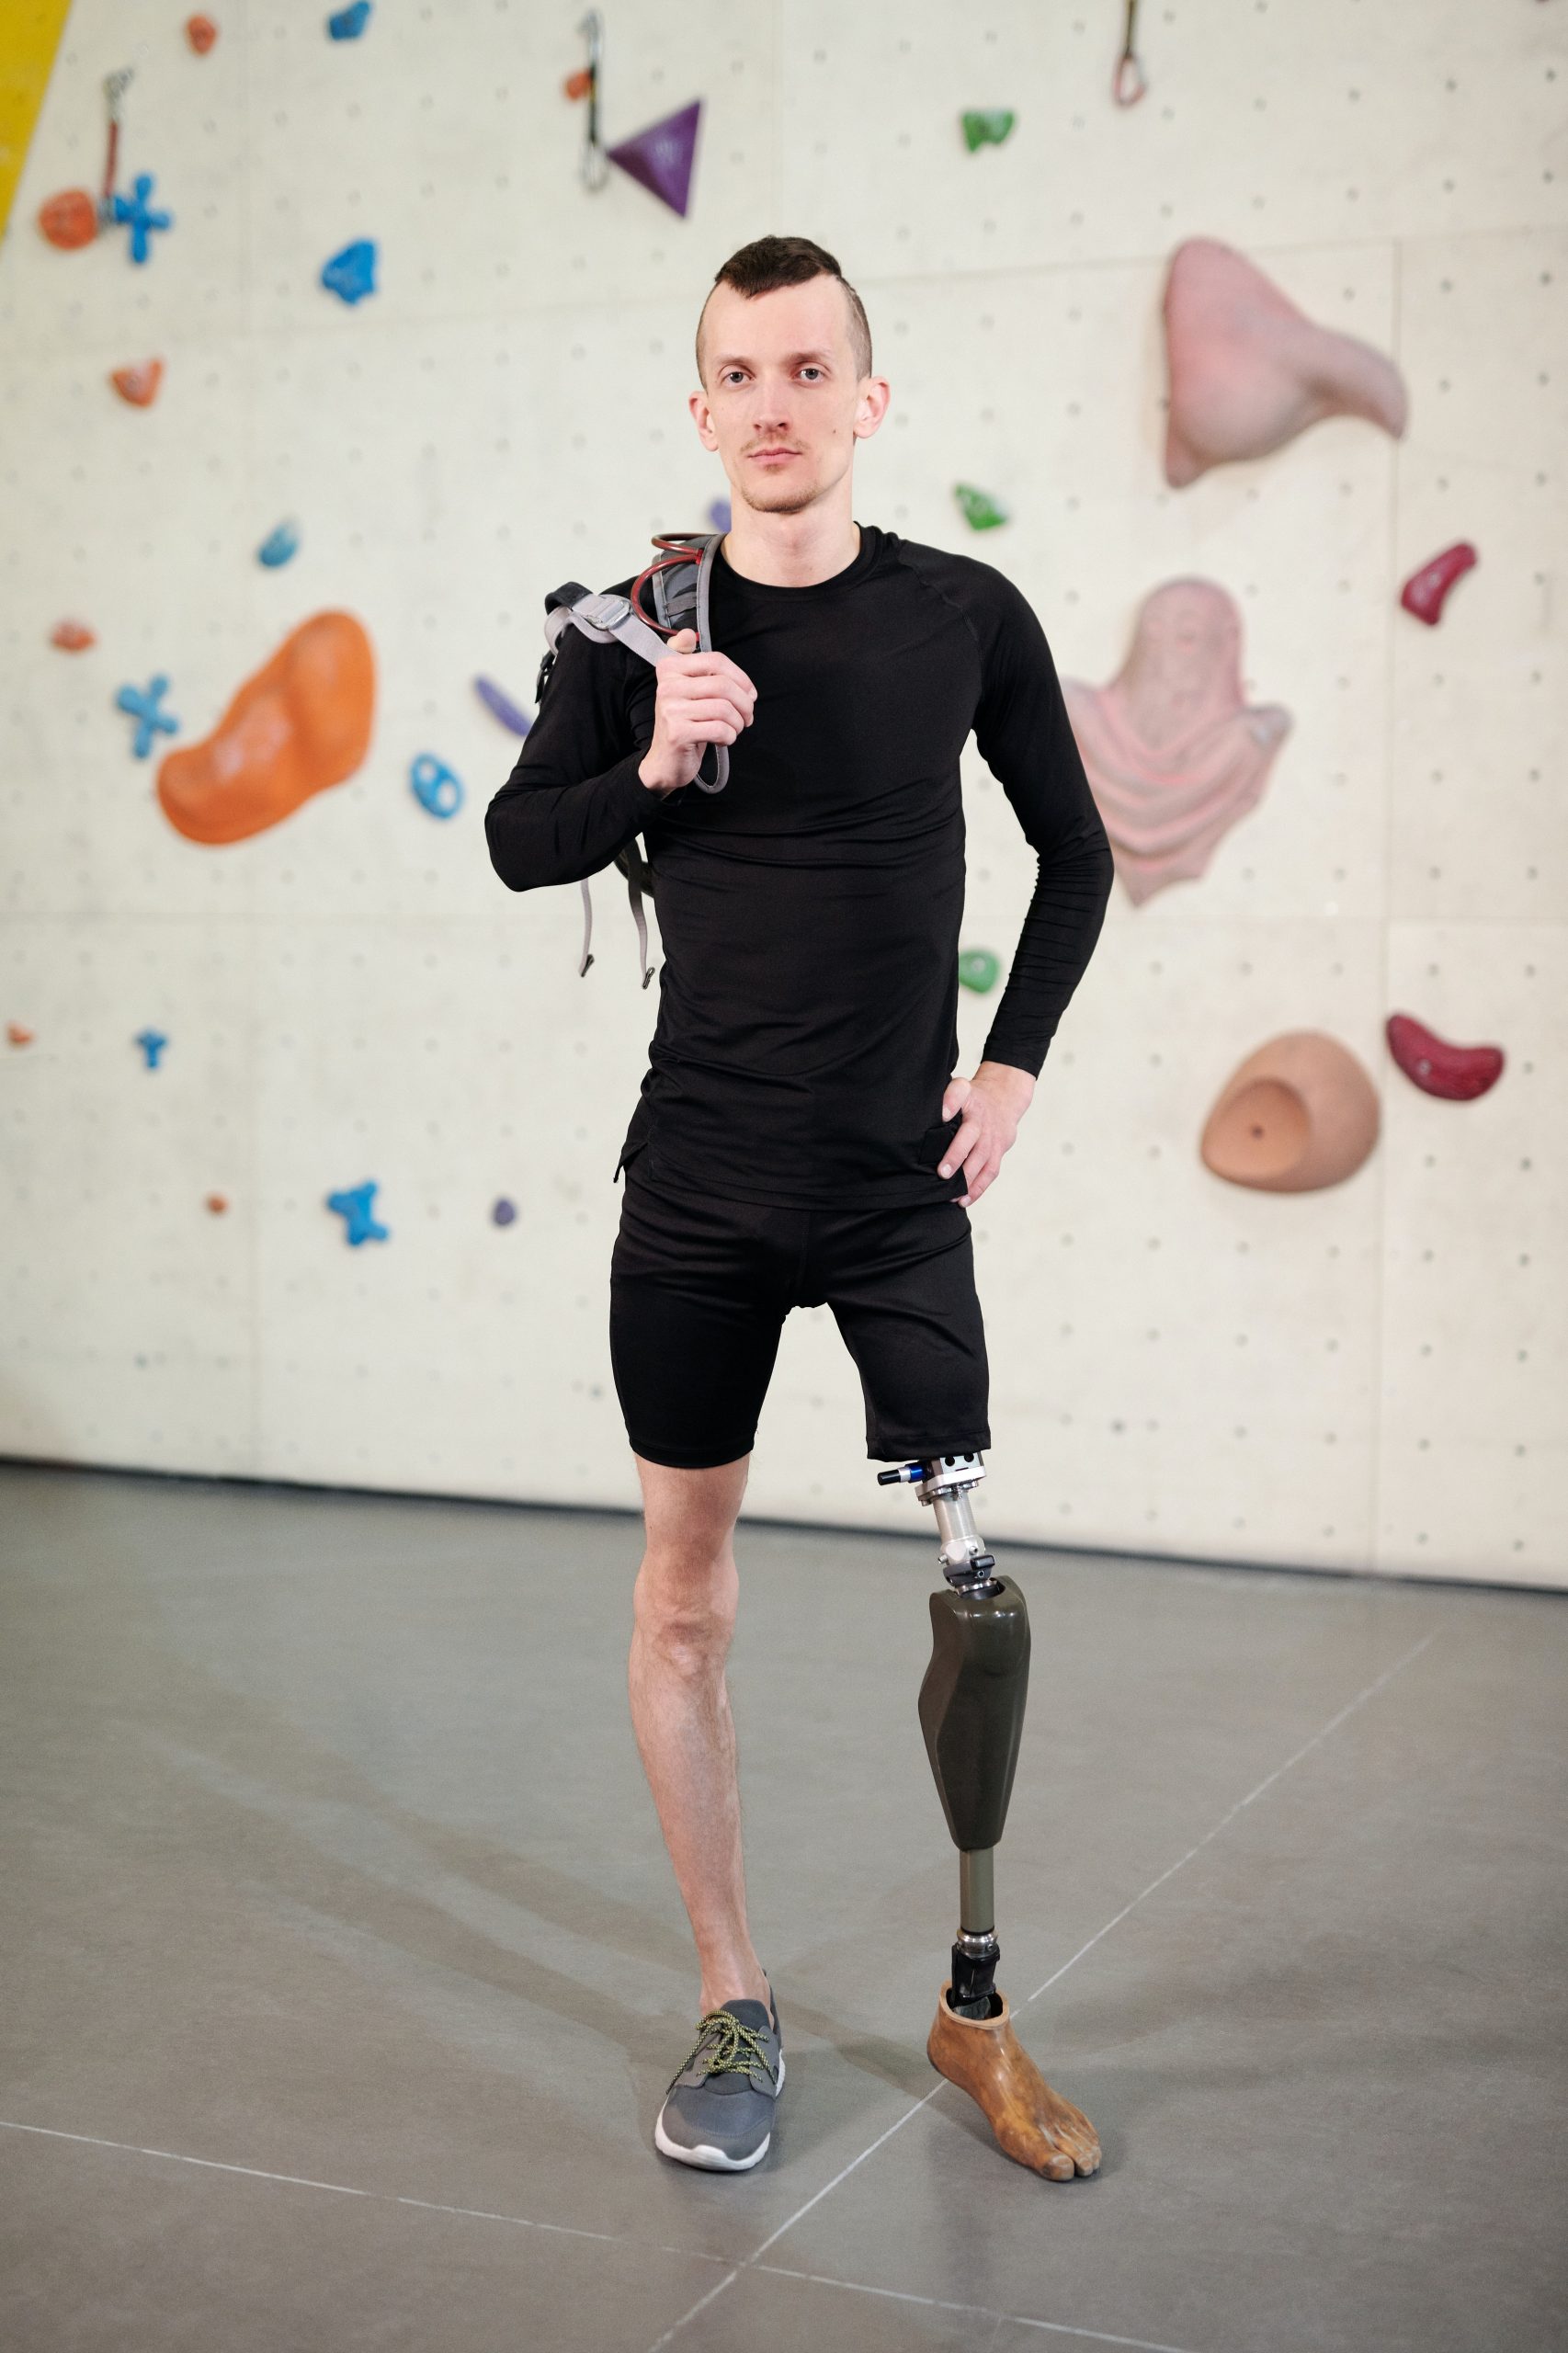 An innovation of a prosthetic leg being used by a rock climber